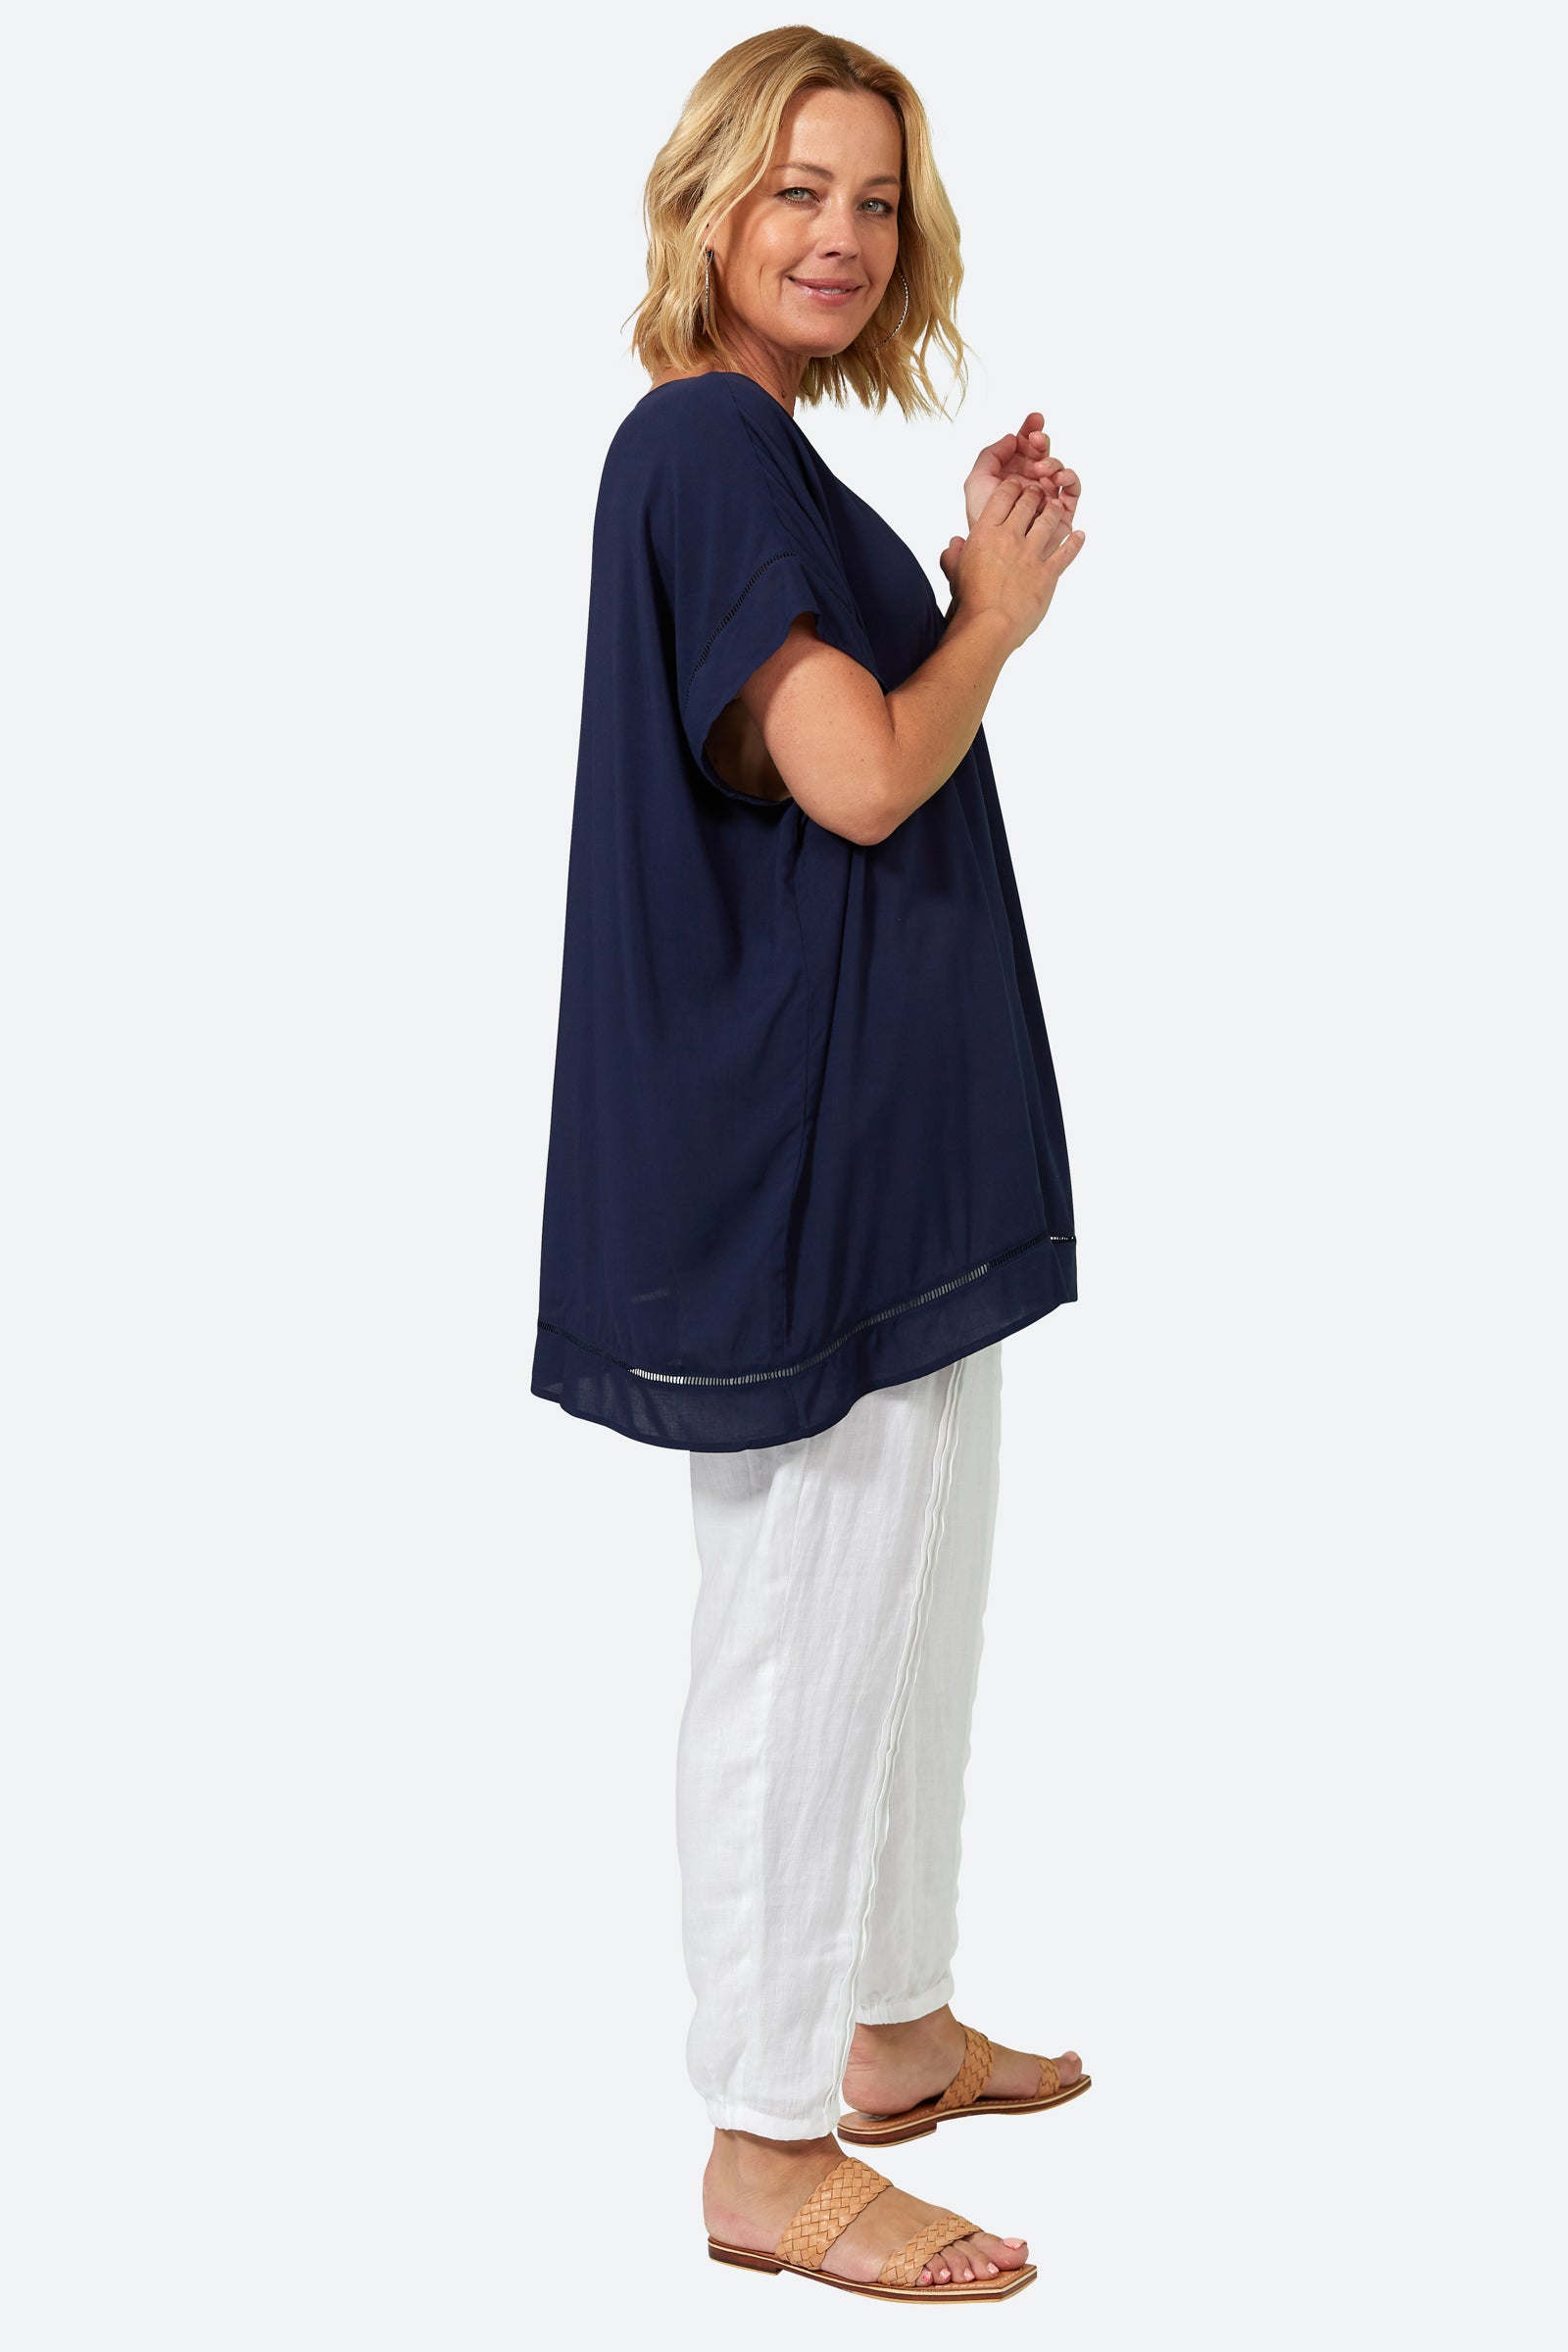 Esprit Relax Top - Sapphire - eb&ive Clothing - Top S/S One Size